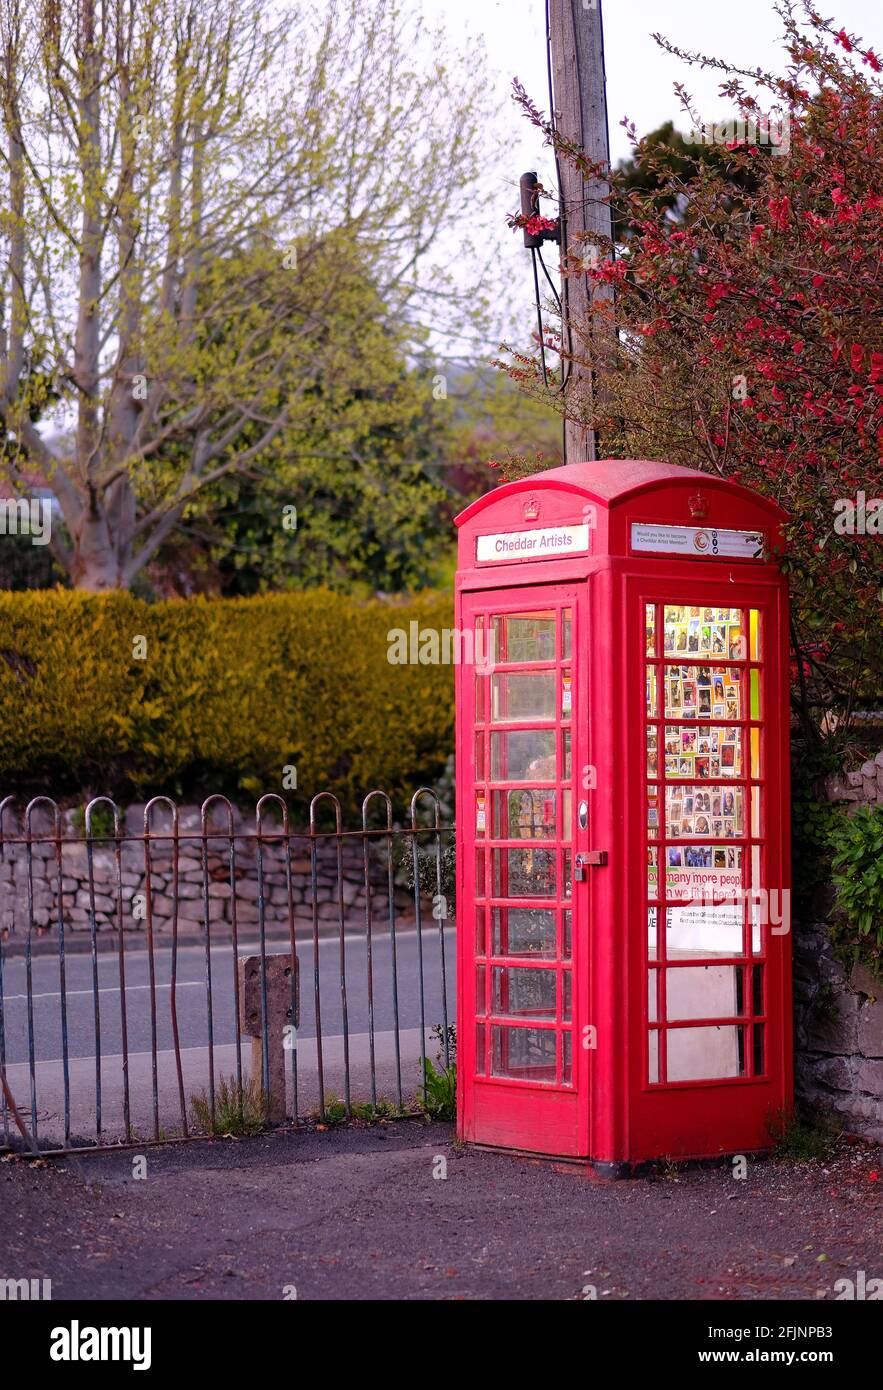 April 2021 - Old classic British Public telephone call box now repurposed for use by the local arts group in Cheddar. Stock Photo